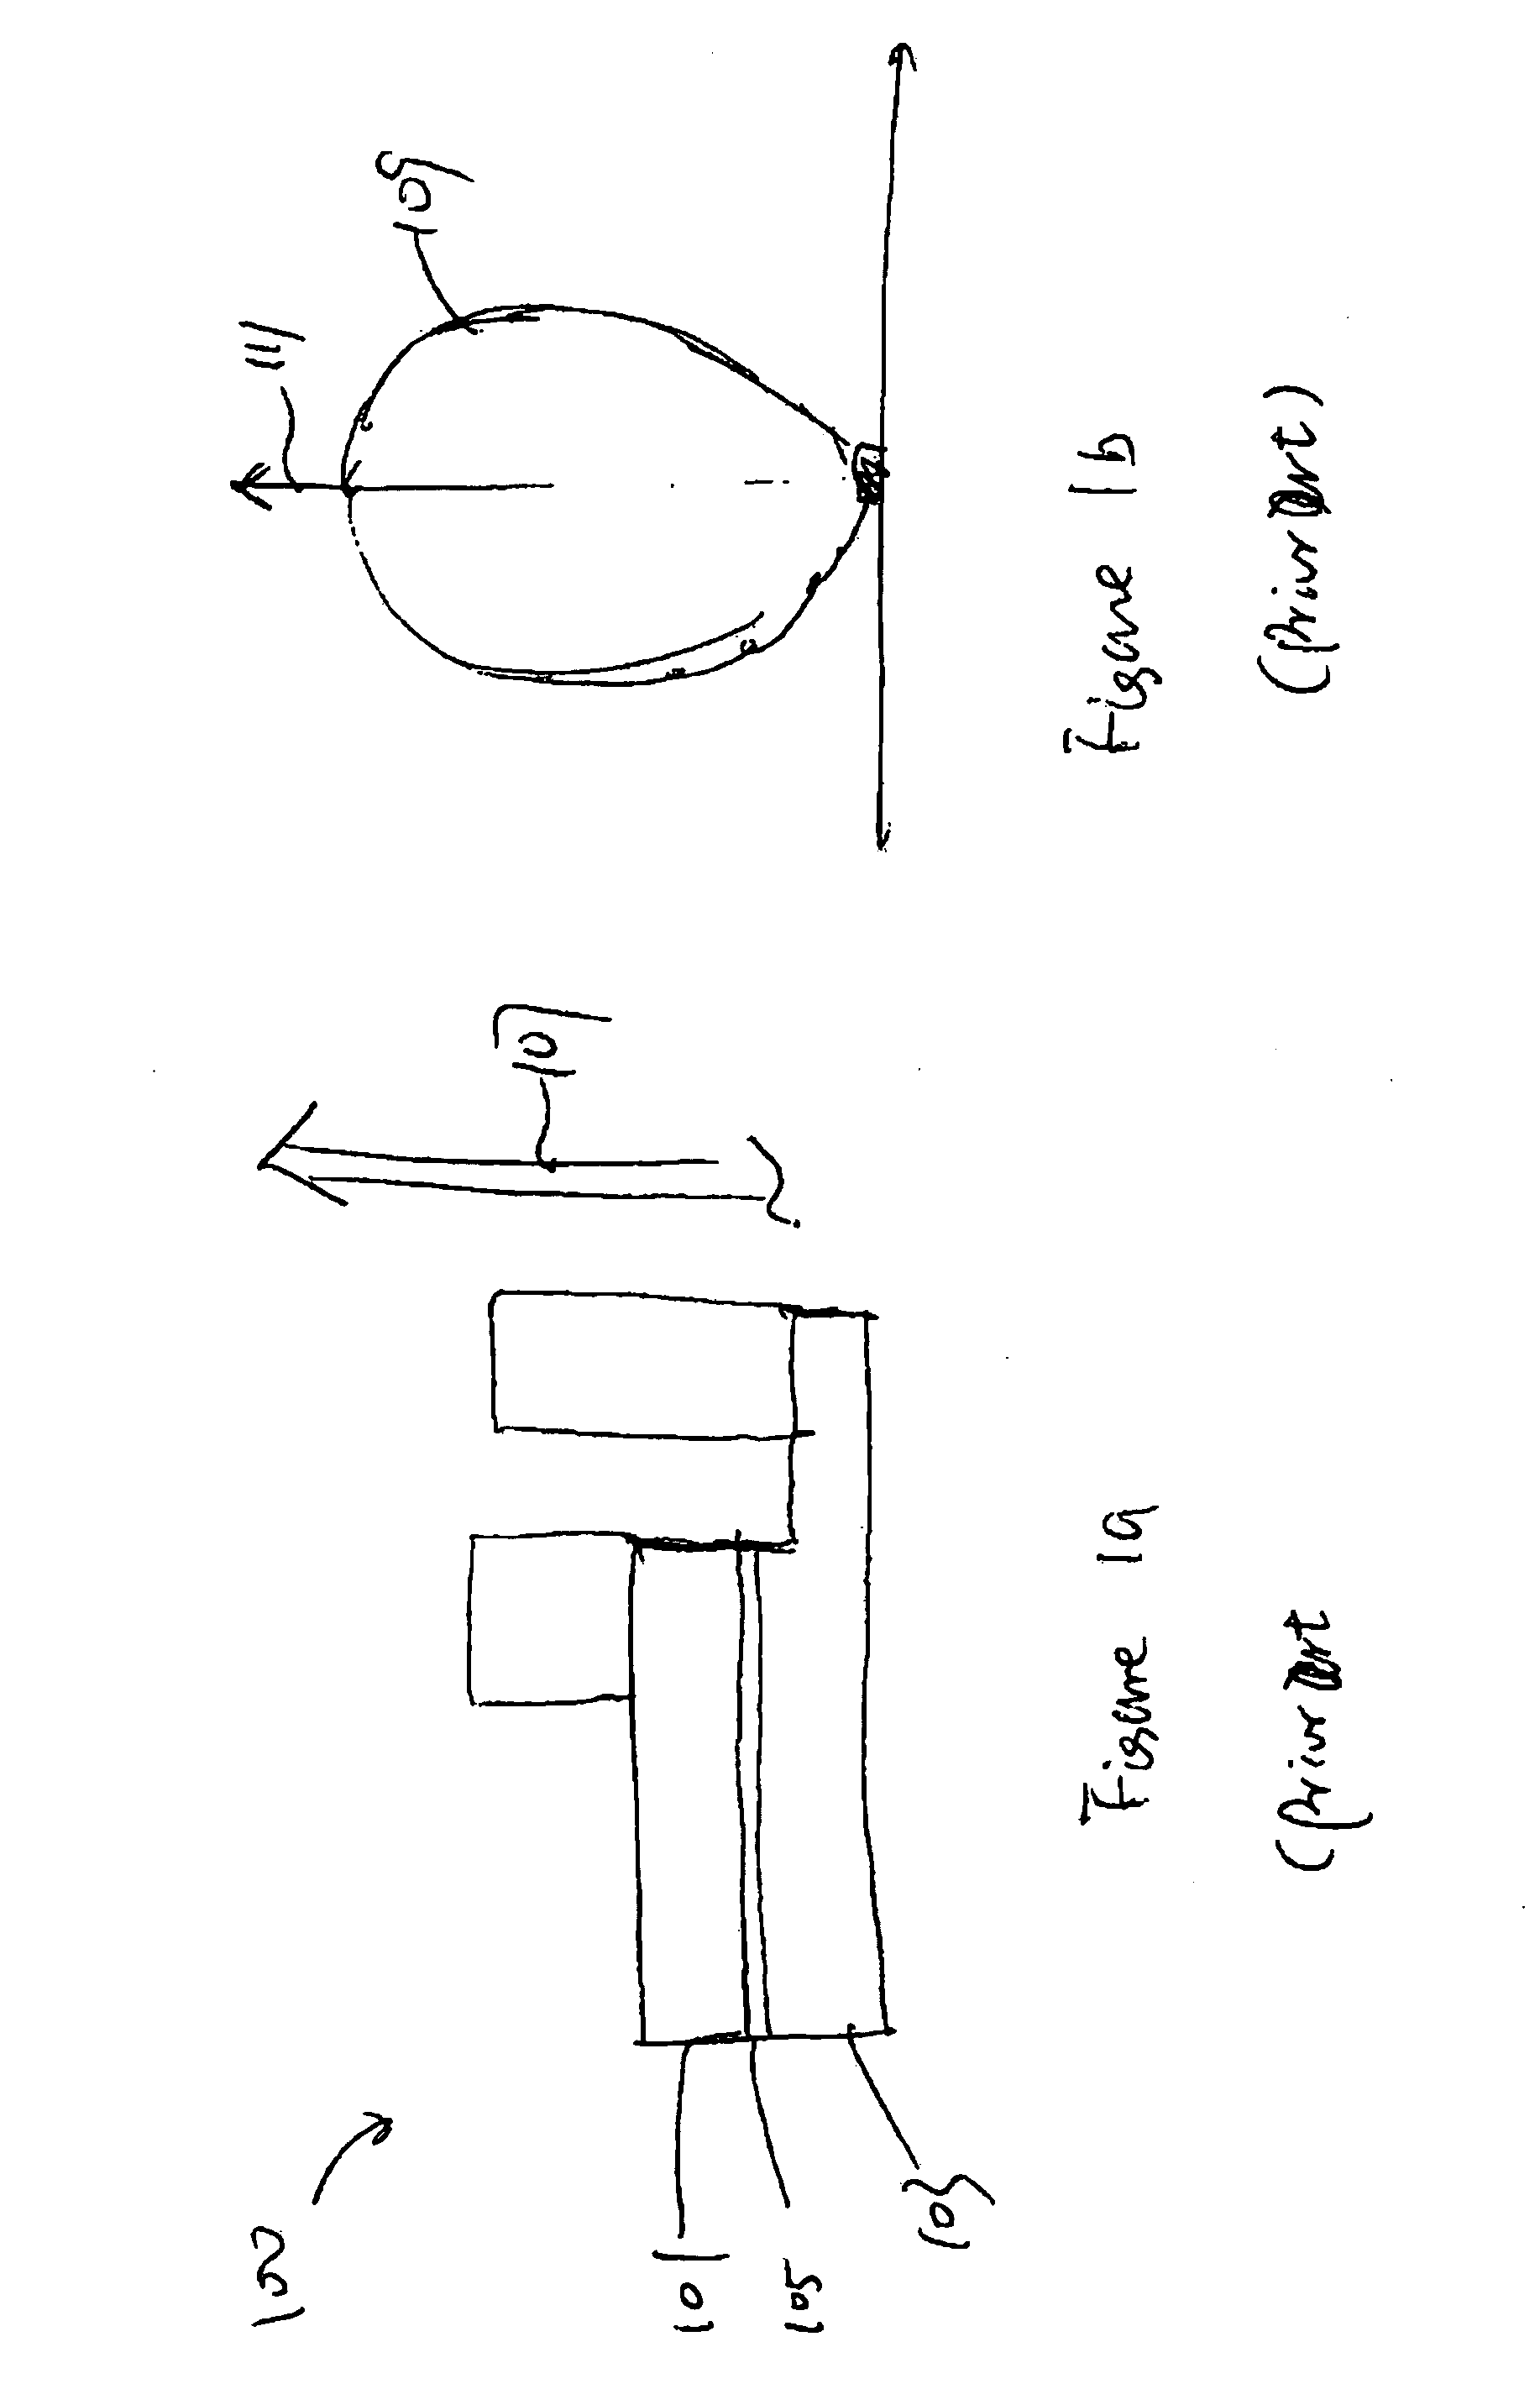 Light emitting diode device, and manufacture and use thereof